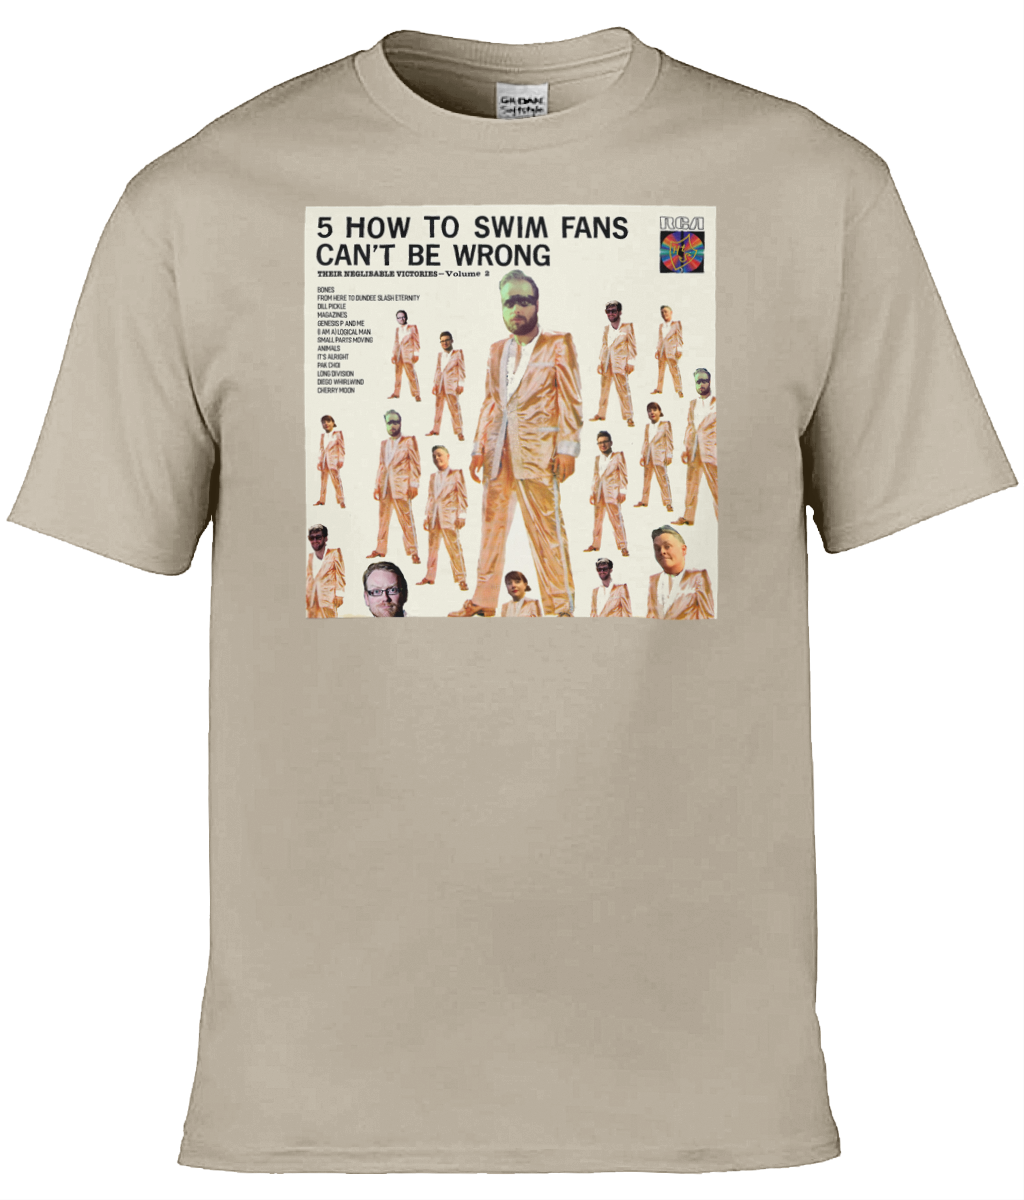 5 How To Swim Fans Can't Be Wrong t-shirt